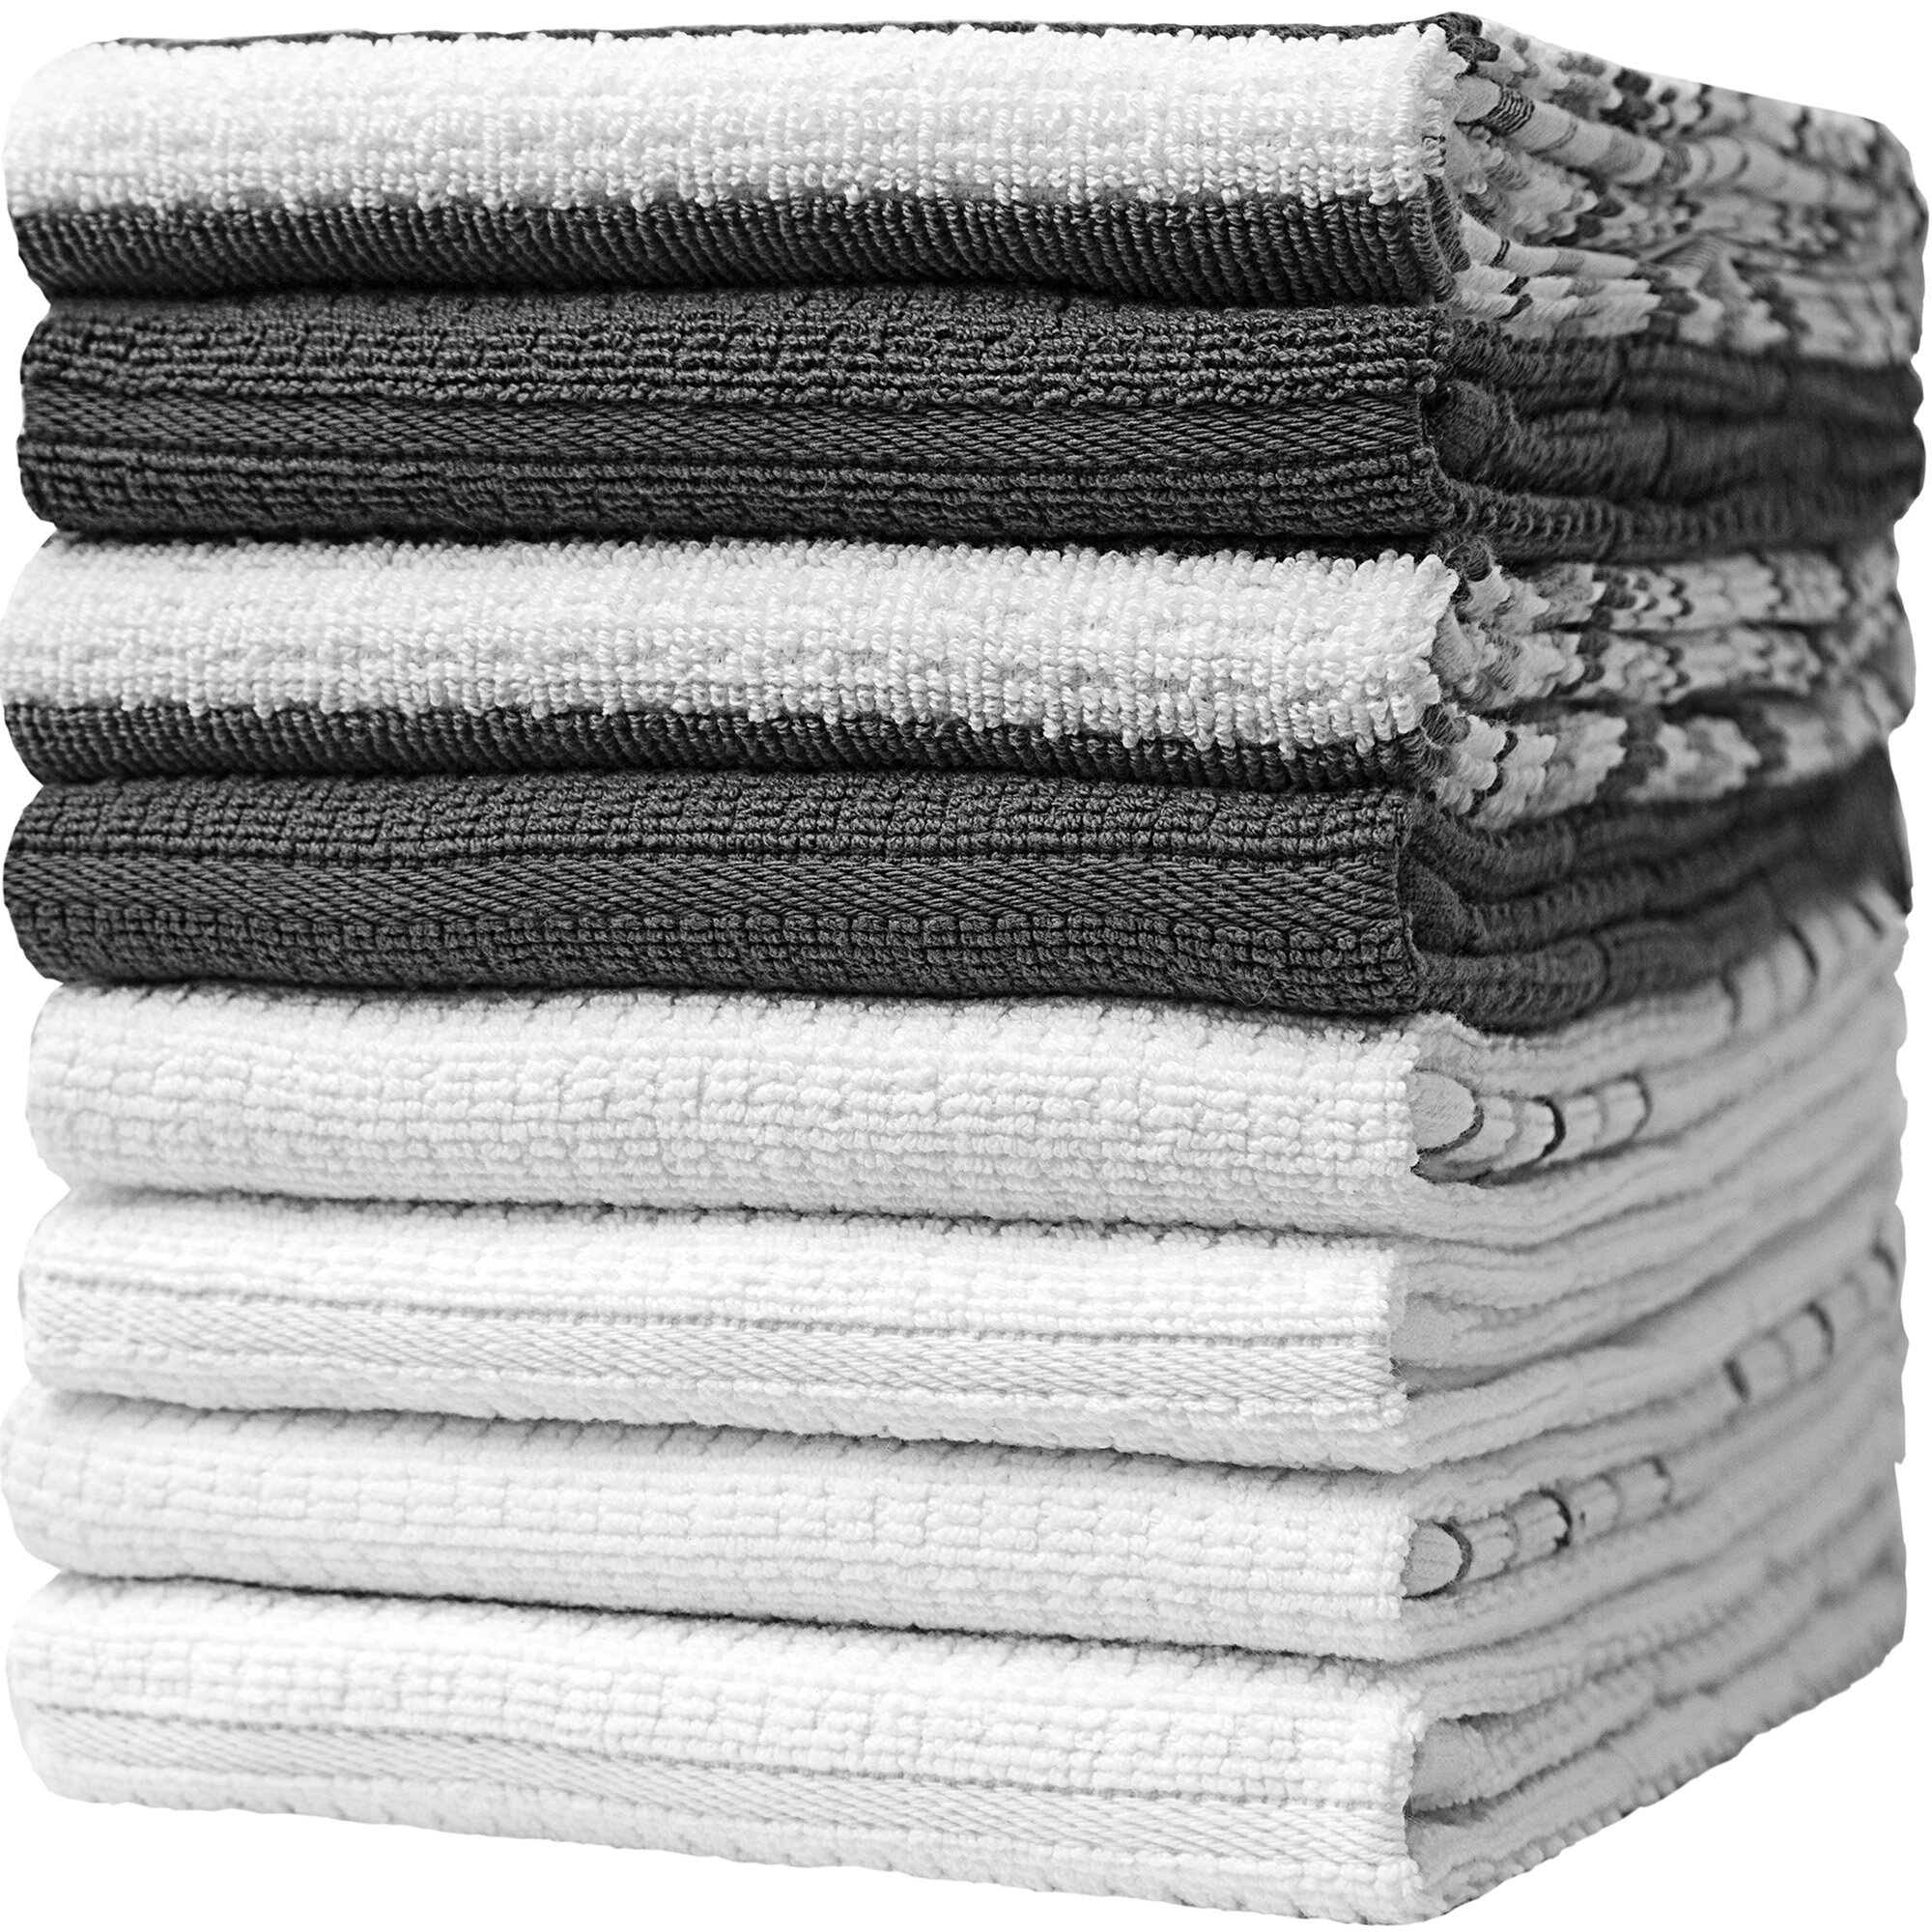 16 x 28 6 Pack Natural Ring Spun Cotton Bumble Premium Cotton Kitchen Towels Highly Absorbent with Hanging Loop 380 GSM Decorative Set Soft Large Tea Towel Set Red Check Design